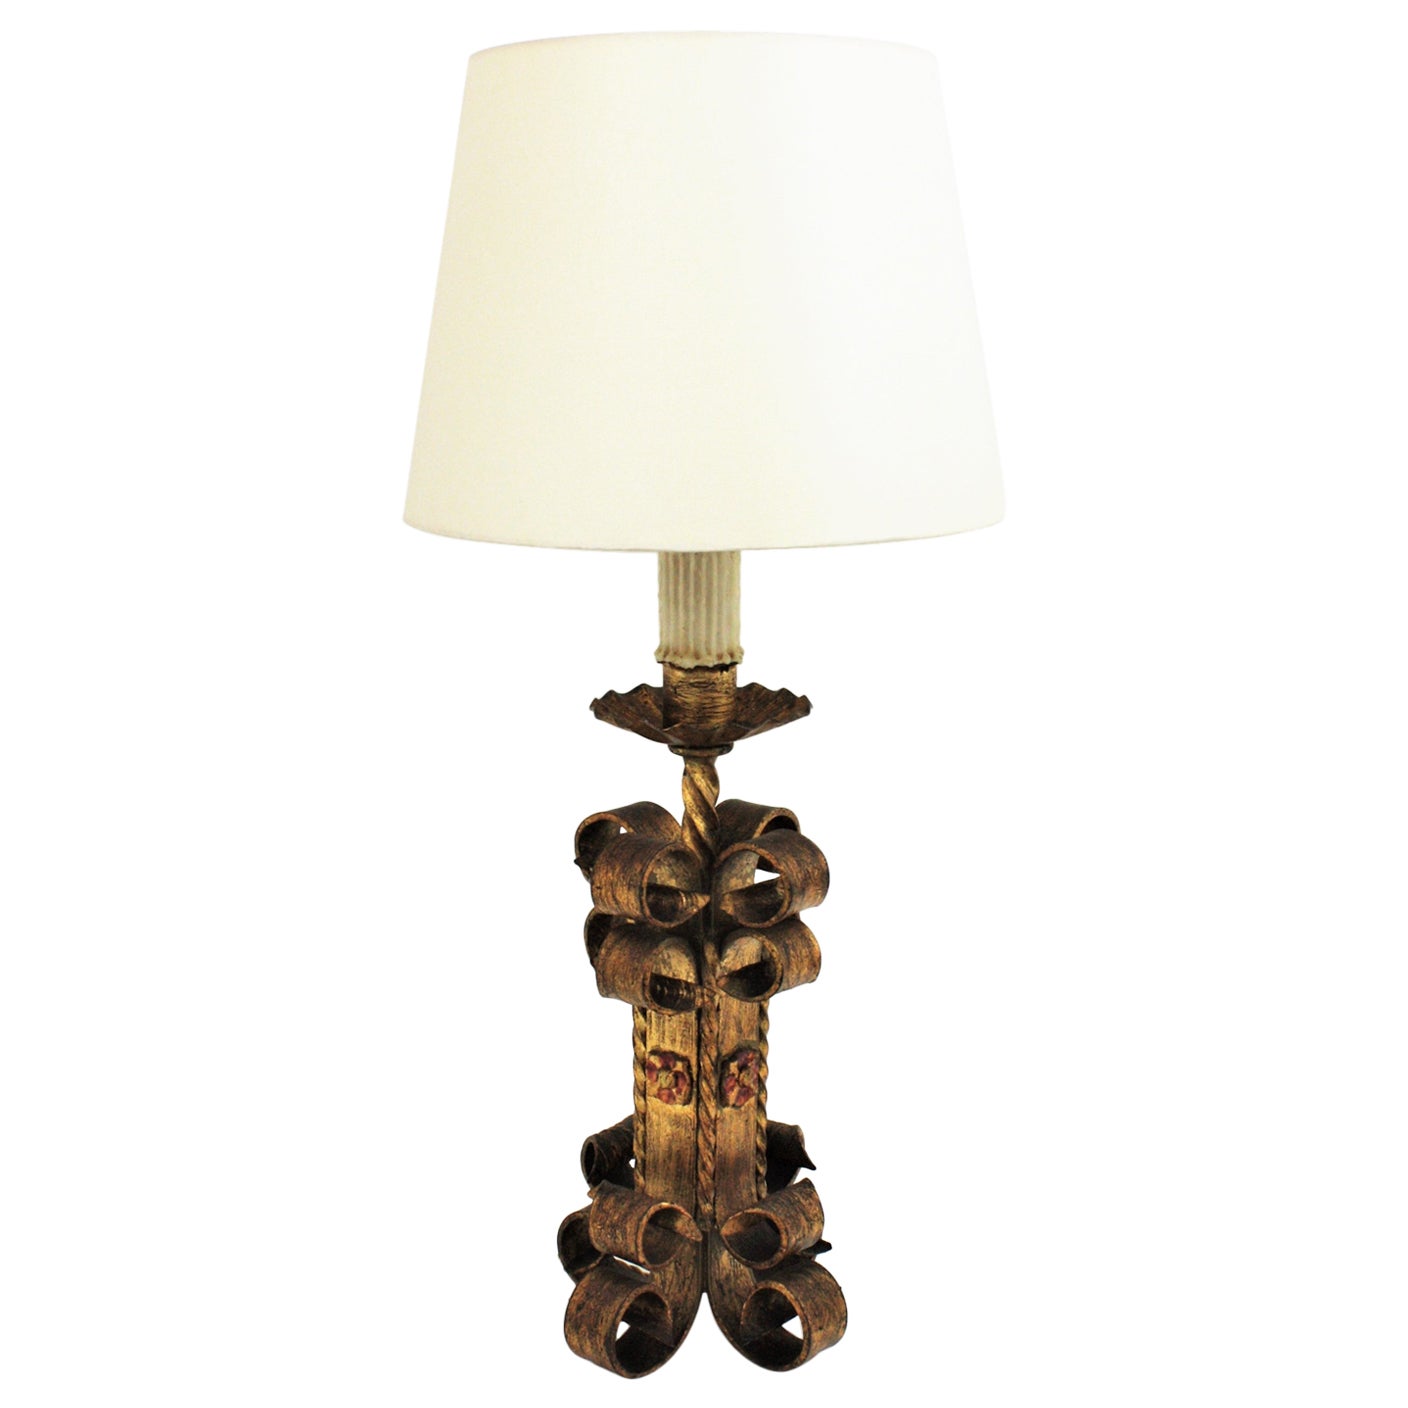 Spanish Revival Scrollwork Table Lamp in Gilt Wrought Iron, 1940s For Sale